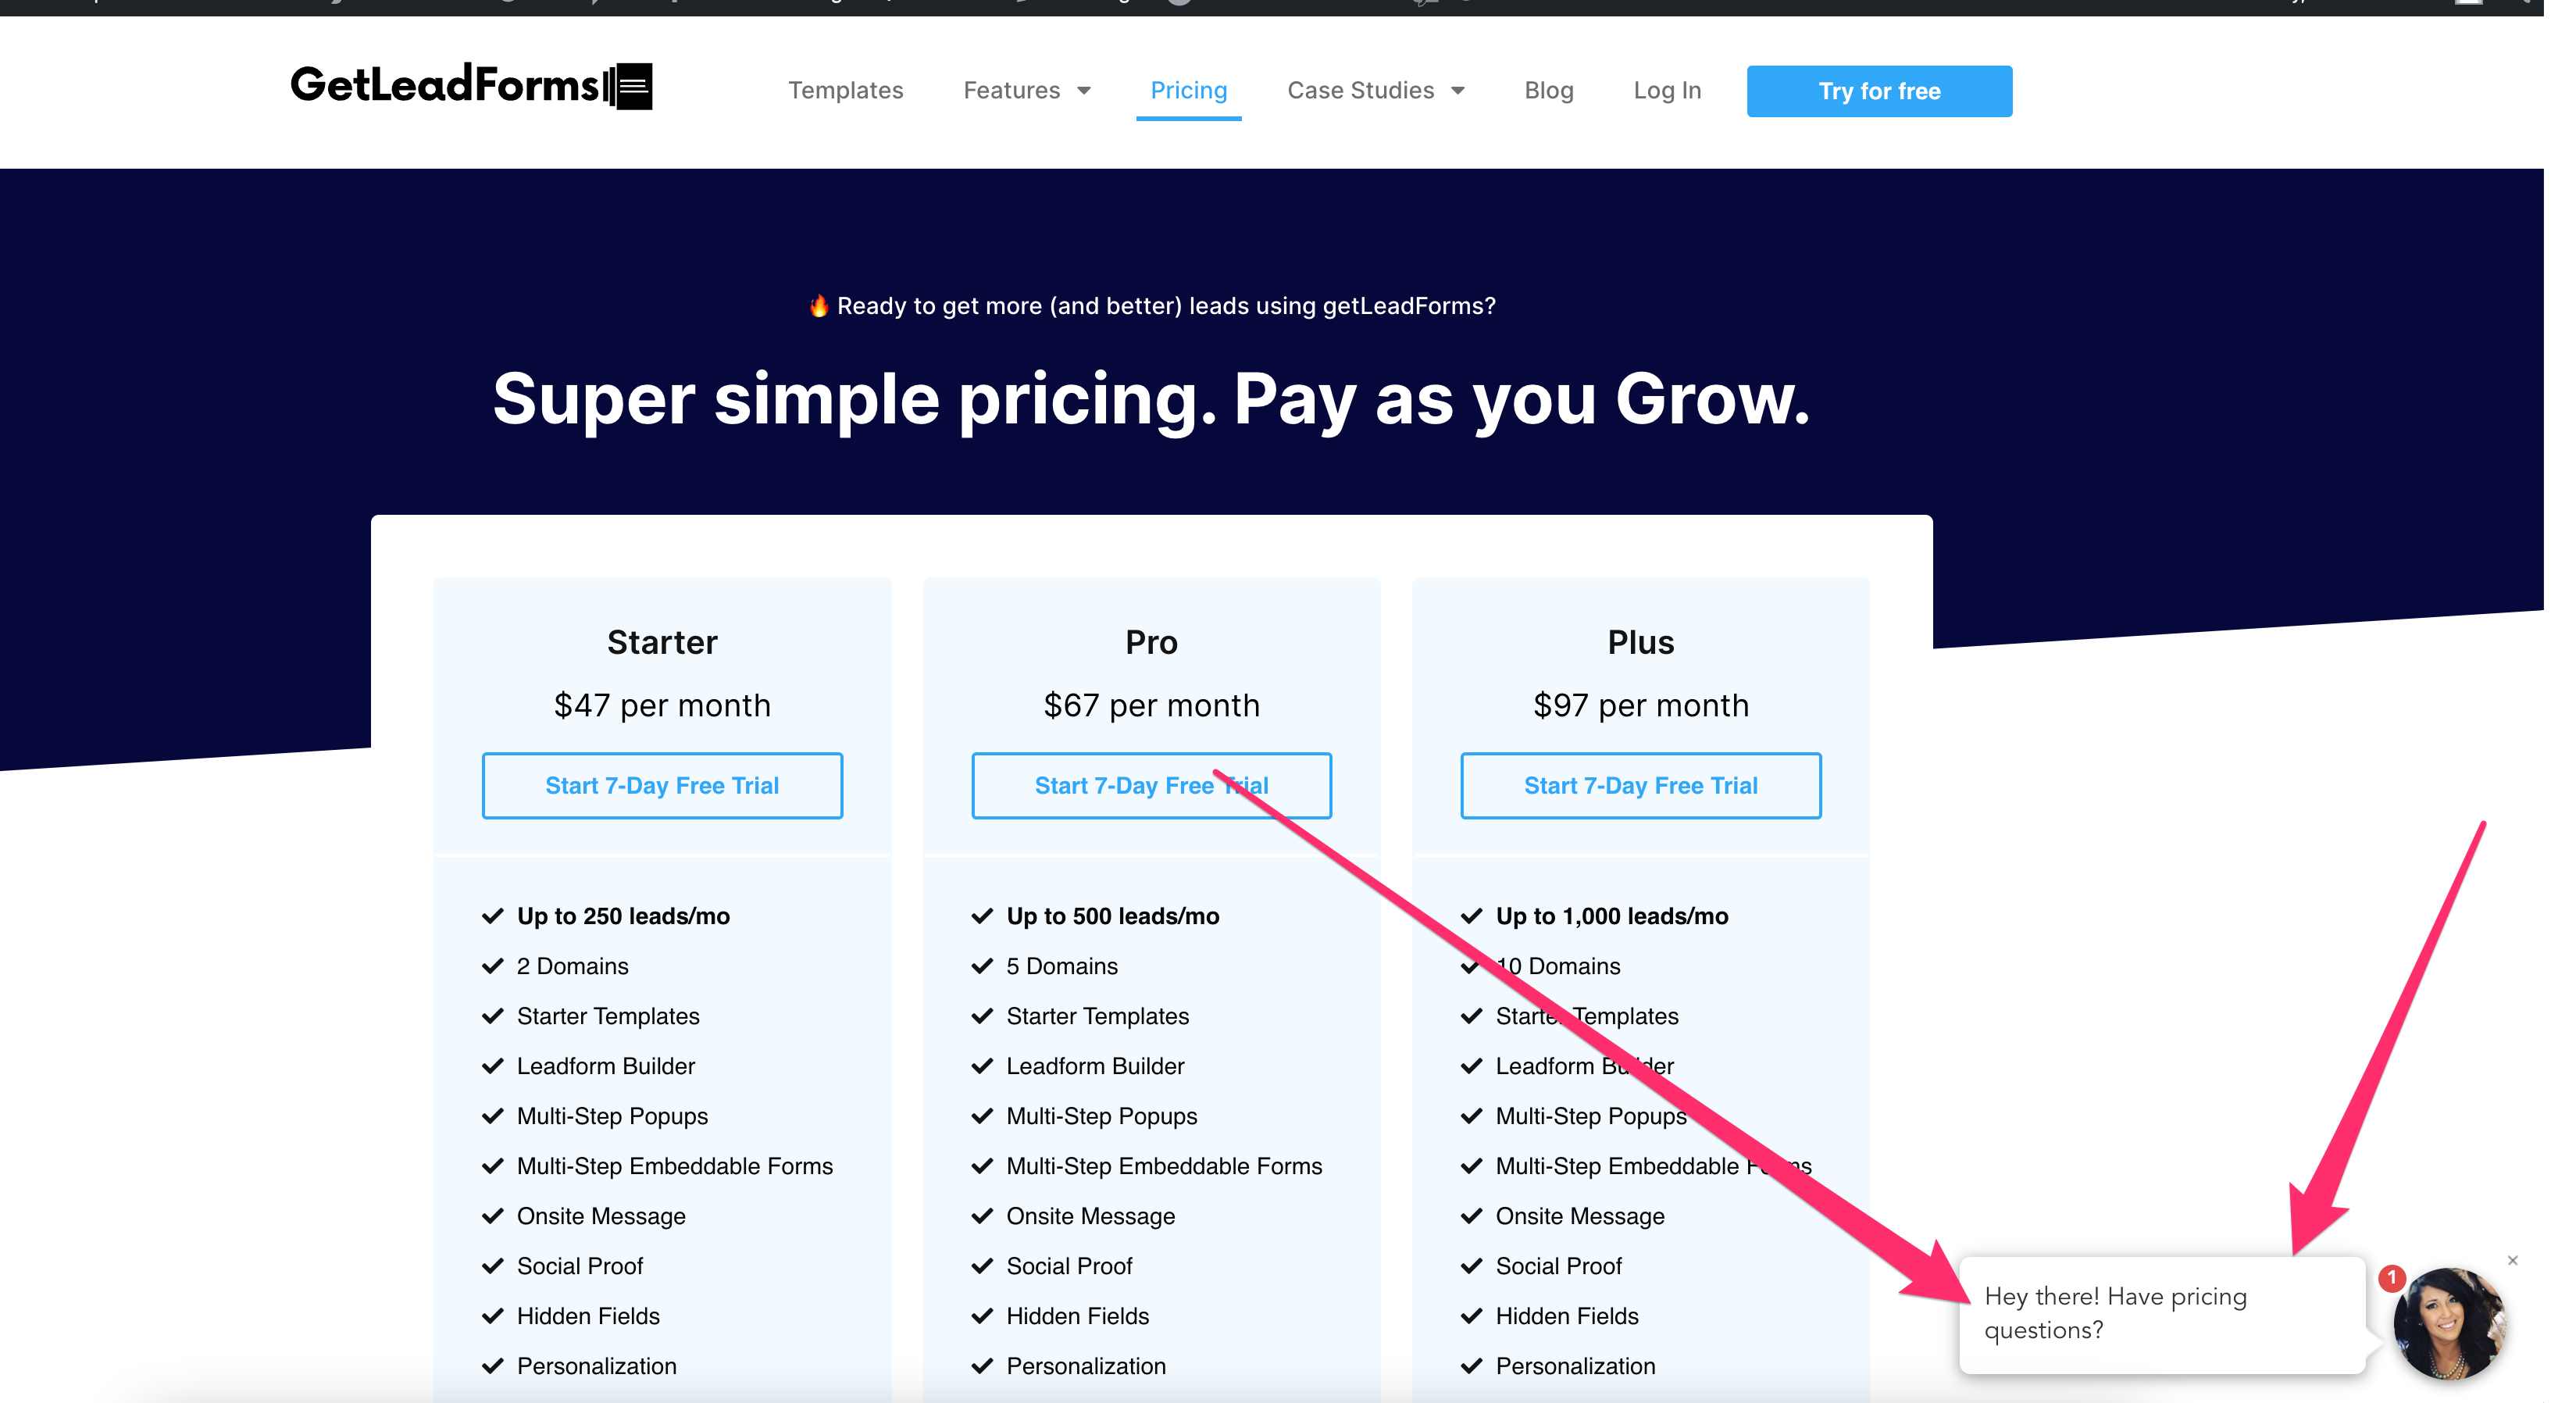 onsite message on pricing page